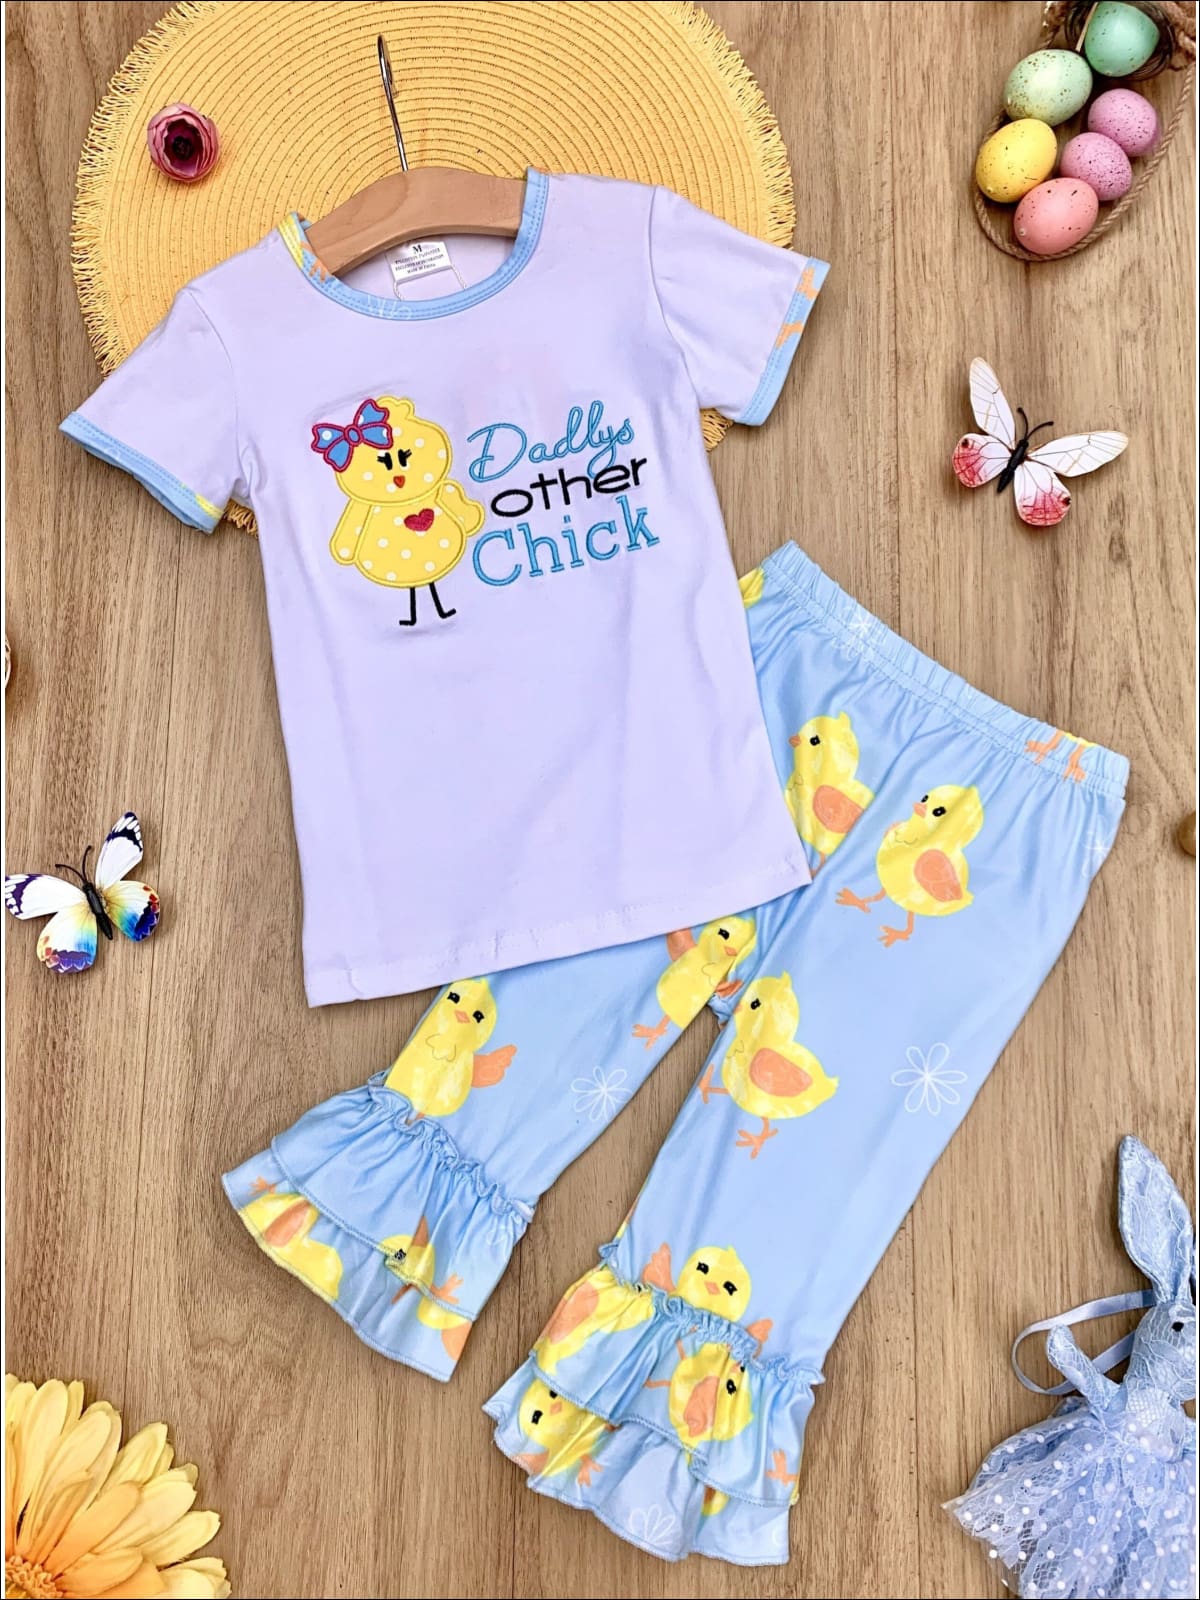 Girls Easter Daddys Other Chick Top & Chick Print Ruffled Leggings Set - Blue / XS-2T - Girls Easter Set